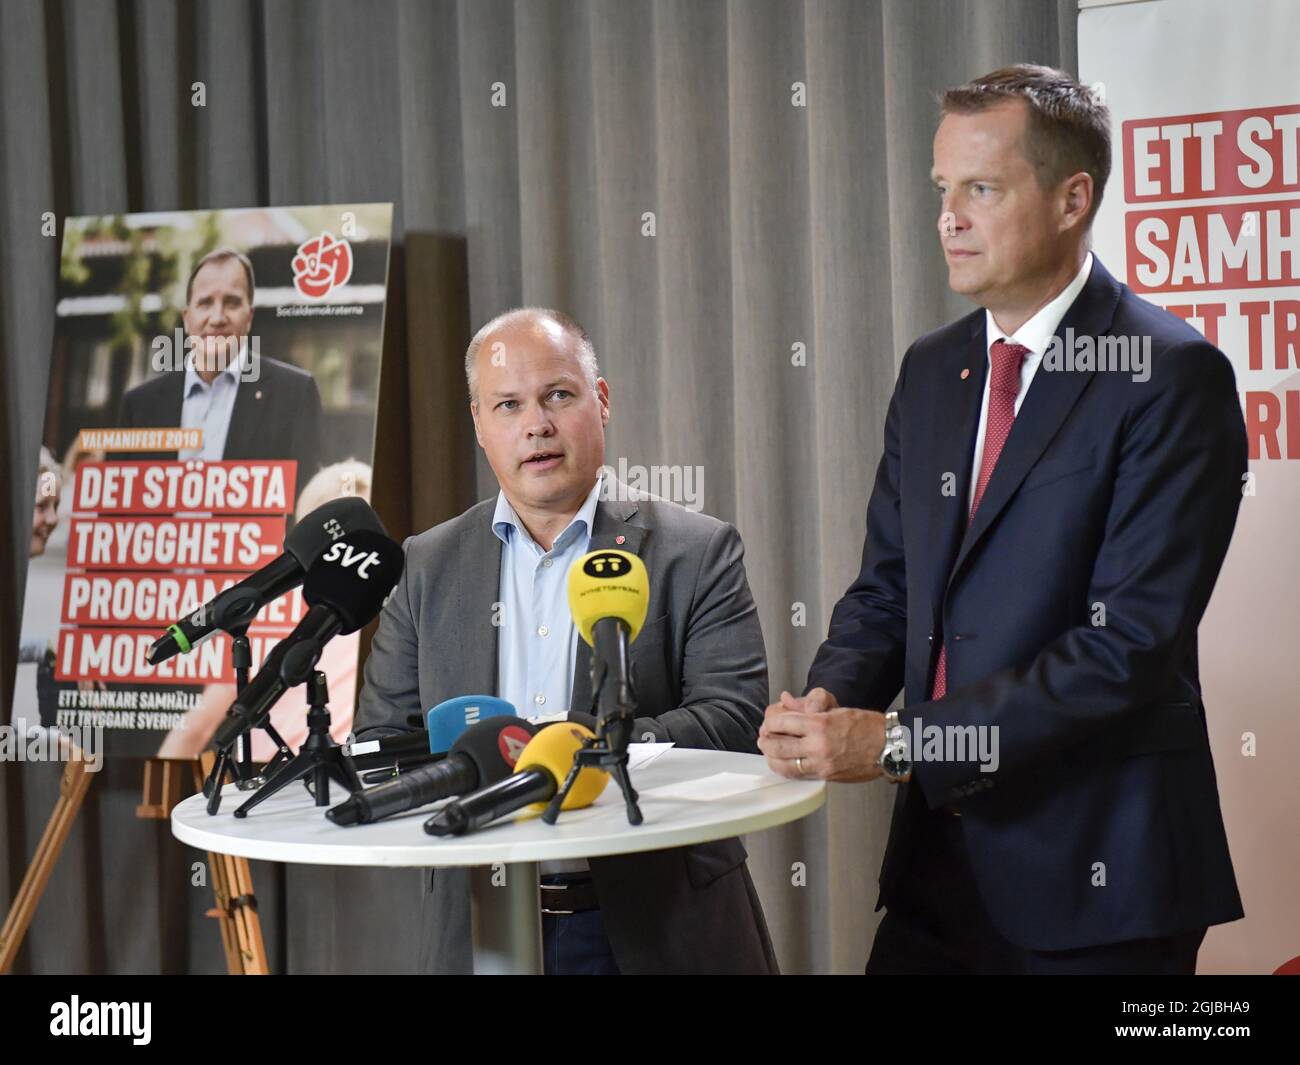 Minister for Justice and Home Affairs Morgan Johansson (L) and Social Democrat party group leader Anders Ygeman hold a press conference after a Social Democrat party executive committe meeting at the party headquarters on Sept. 10, 2018, the day after general elections in Sweden. Photo Jonas Ekstromer / TT / code 10030 Stock Photo